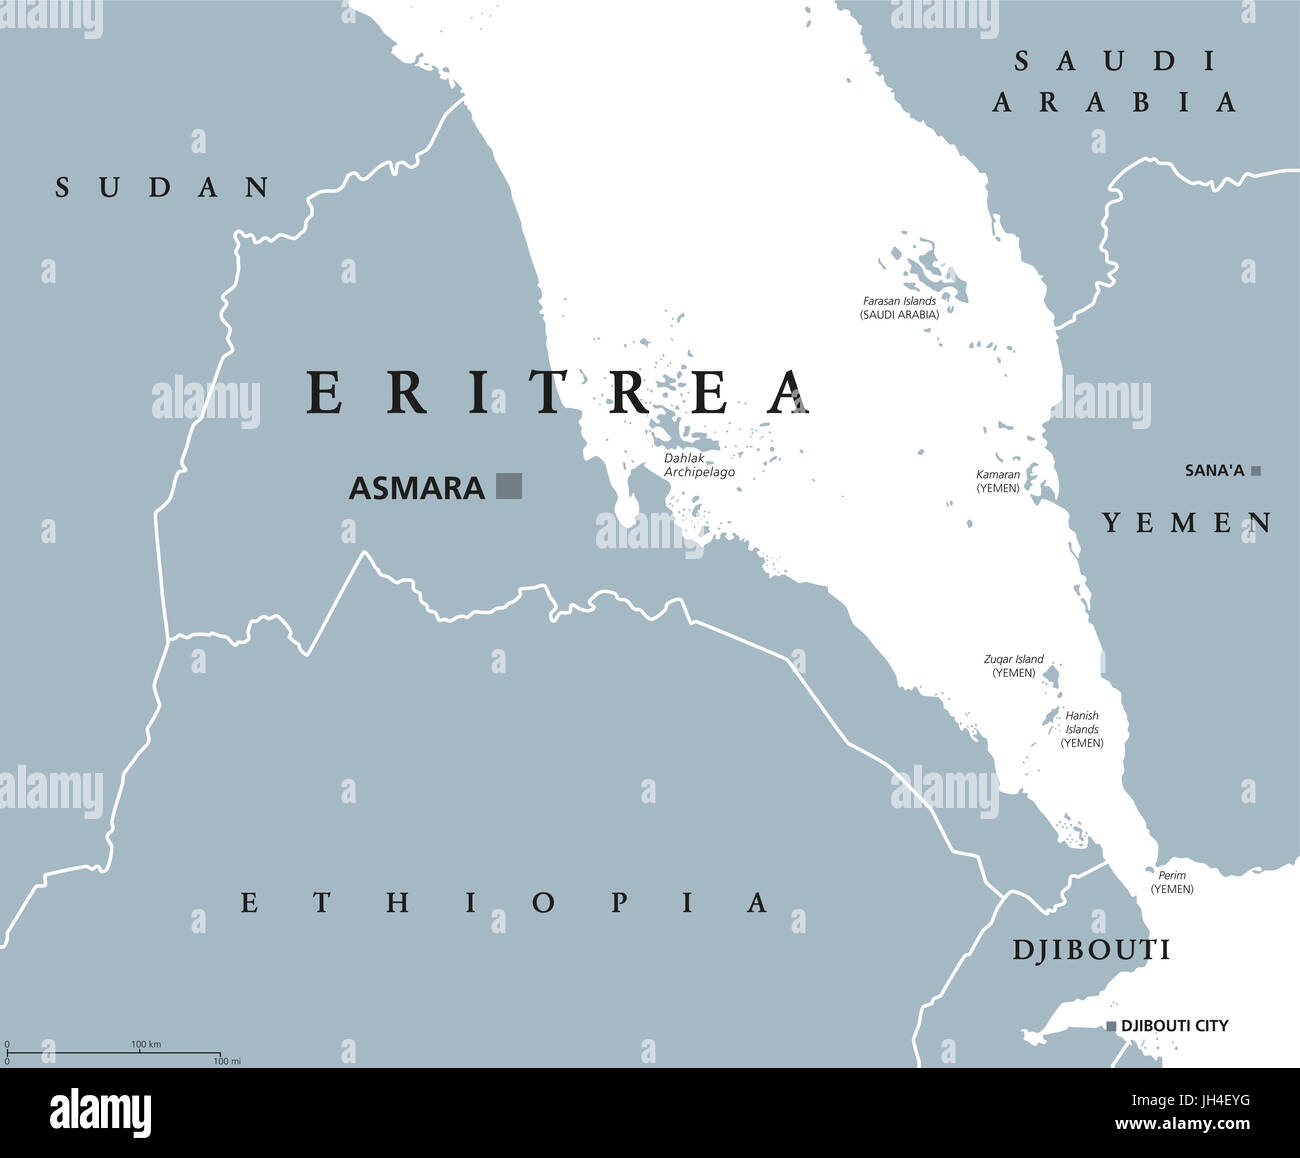 Eritrea political map with capital Asmara. State and country in the Horn of Africa with extensive coastline along the Red Sea. Gray illustration. Stock Photo